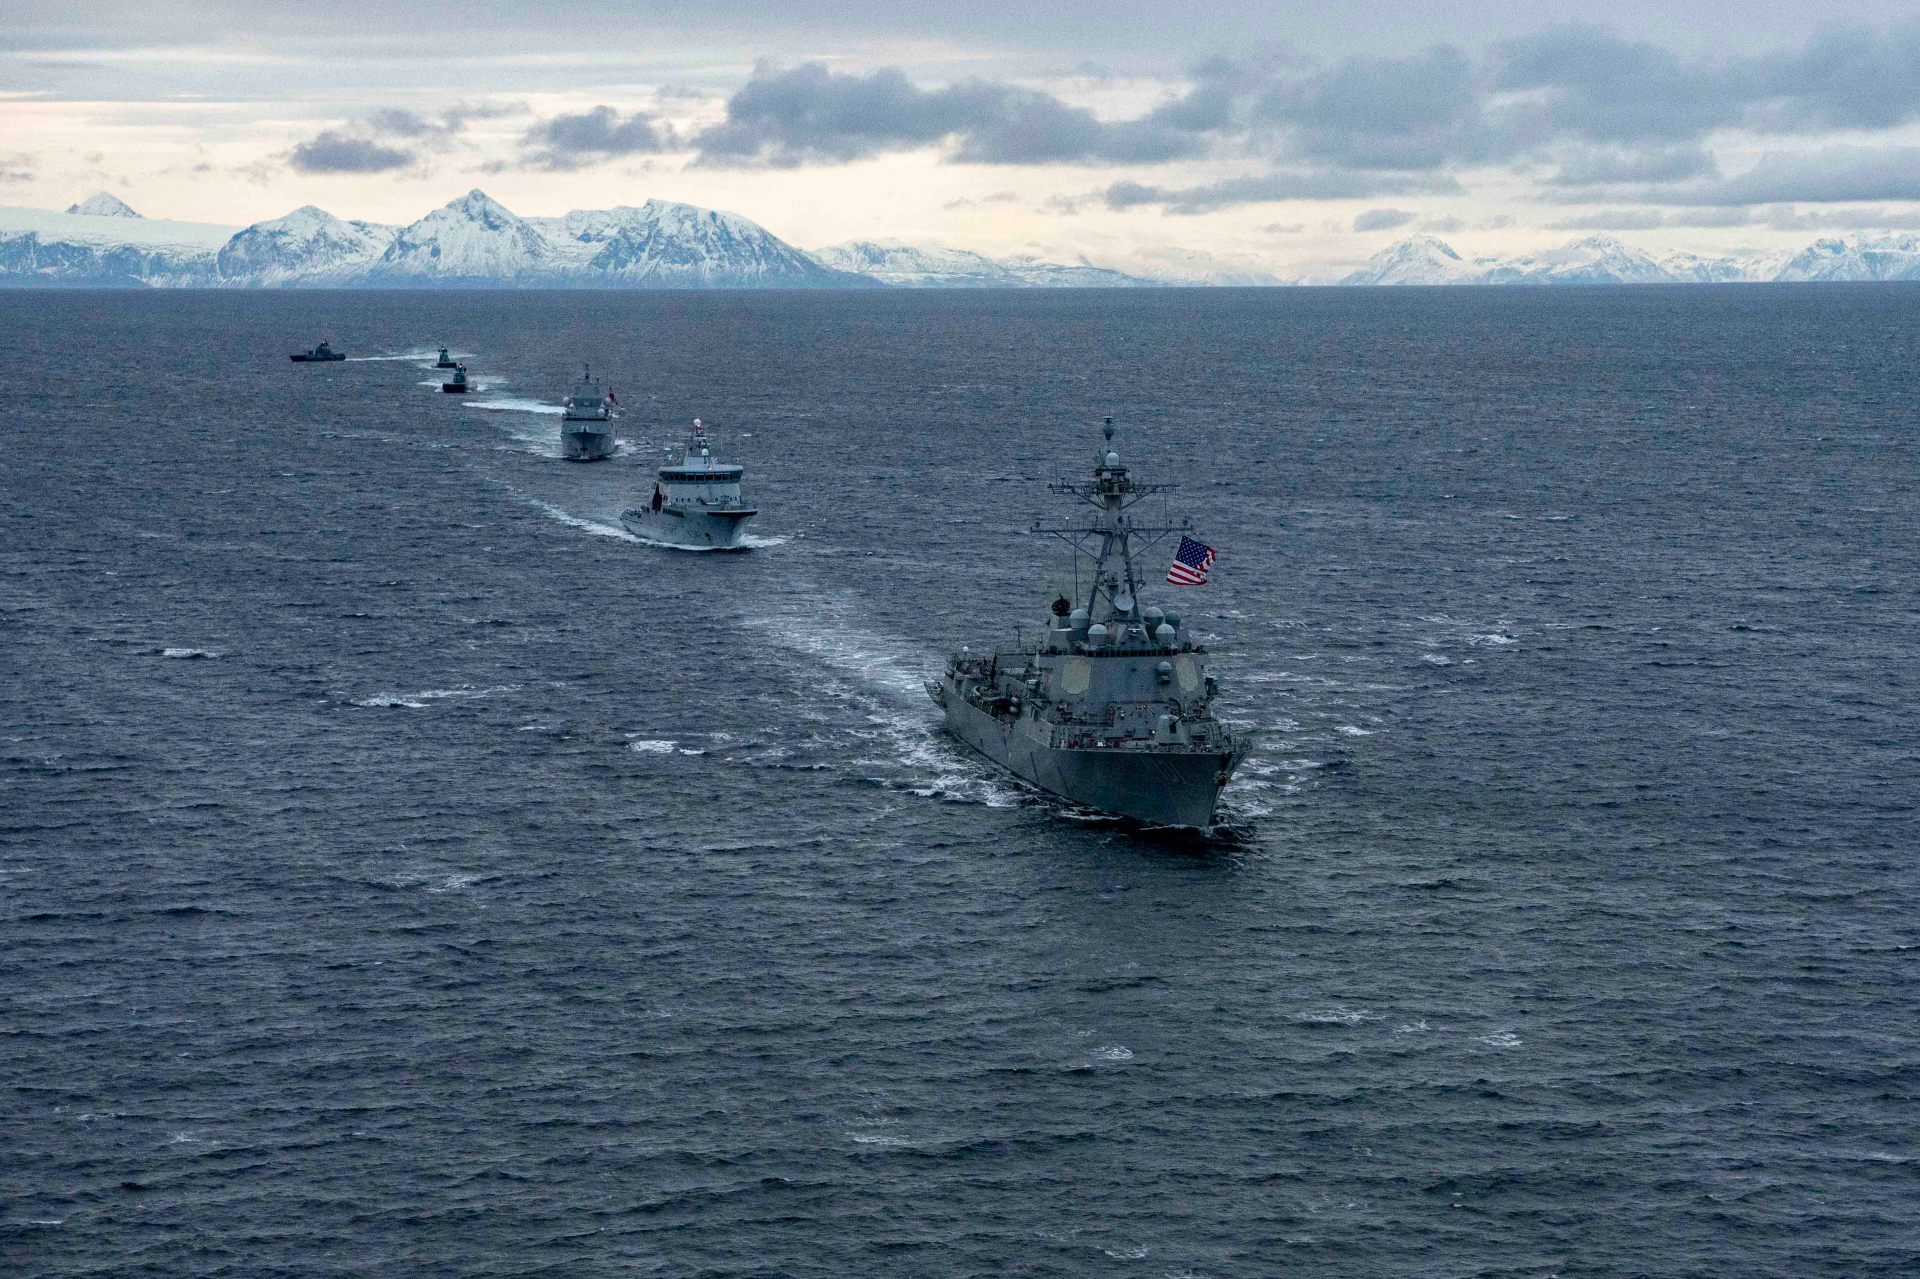 Allied nations participating in the Royal Norwegian navy-led exercise FLOTEX 19